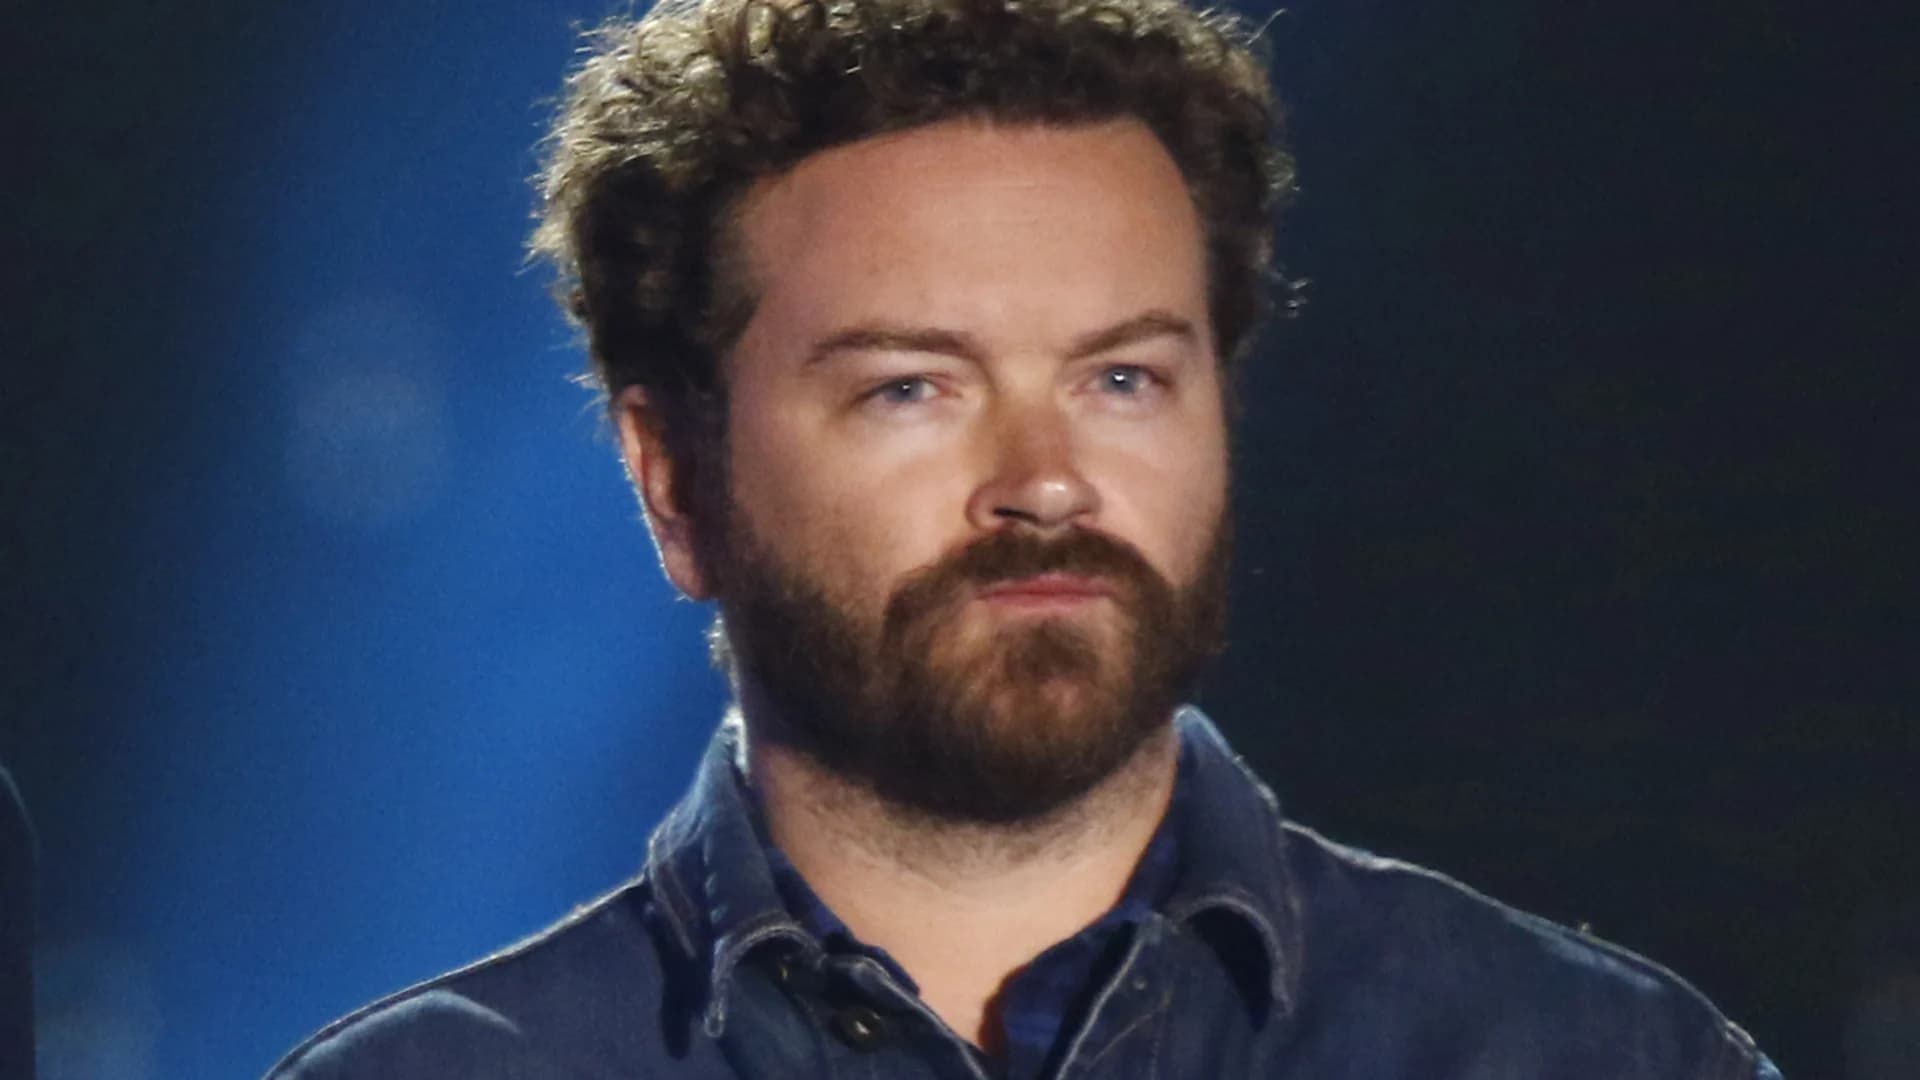 Actor Danny Masterson, who grew up on Long Island, gets 30 years to life in prison for rapes of 2 women